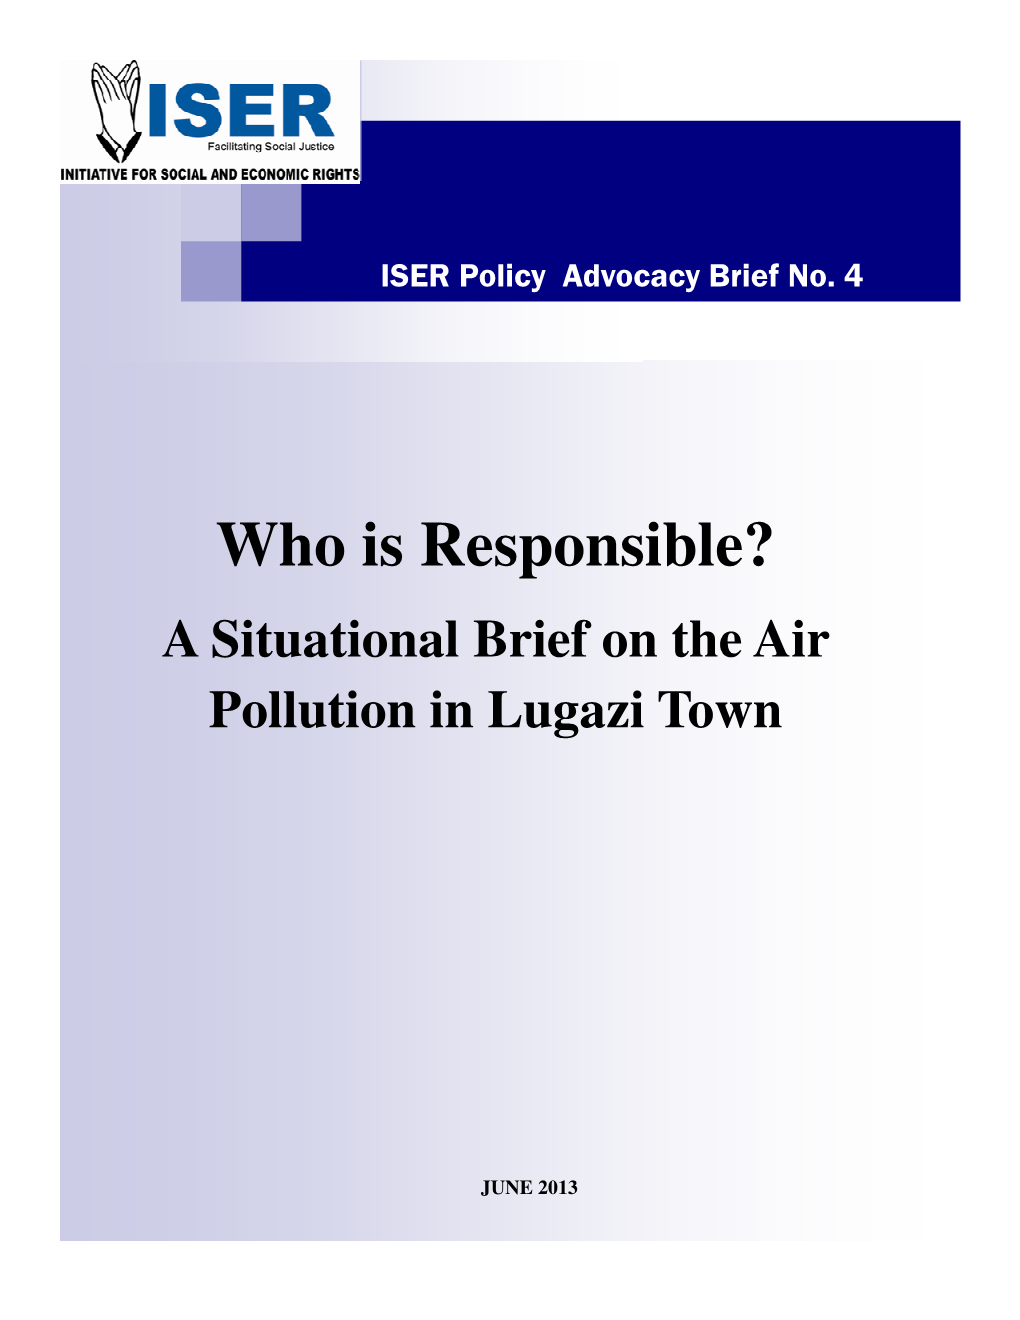 A Situational Brief on the Air Pollution in Lugazi Town